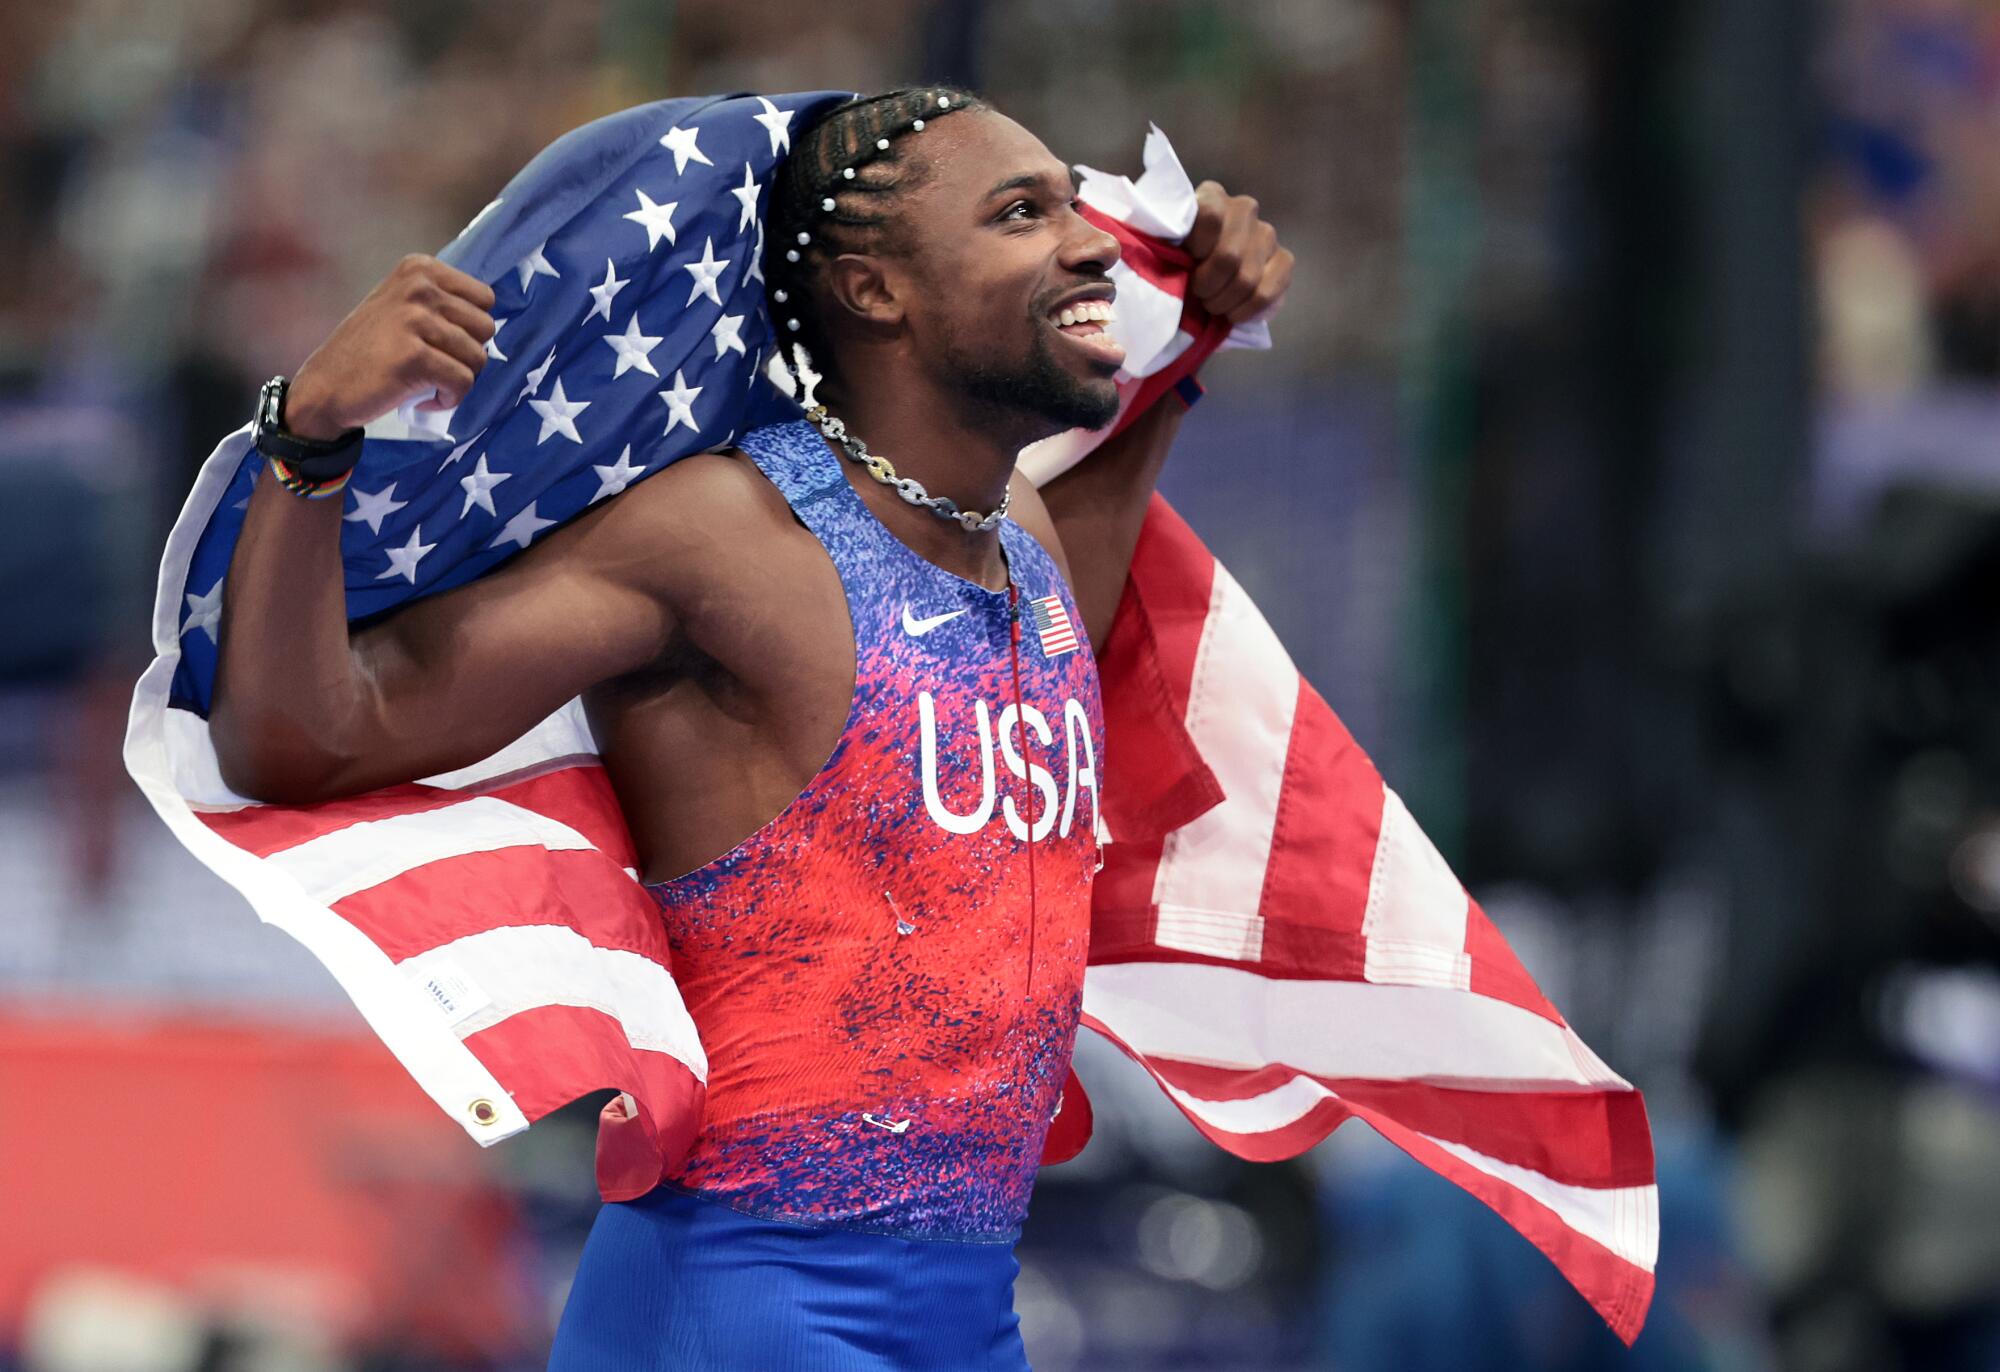 Noah Lyles celebrates after winning gold in the men's 100 meters Sunday at the Paris Olympics.